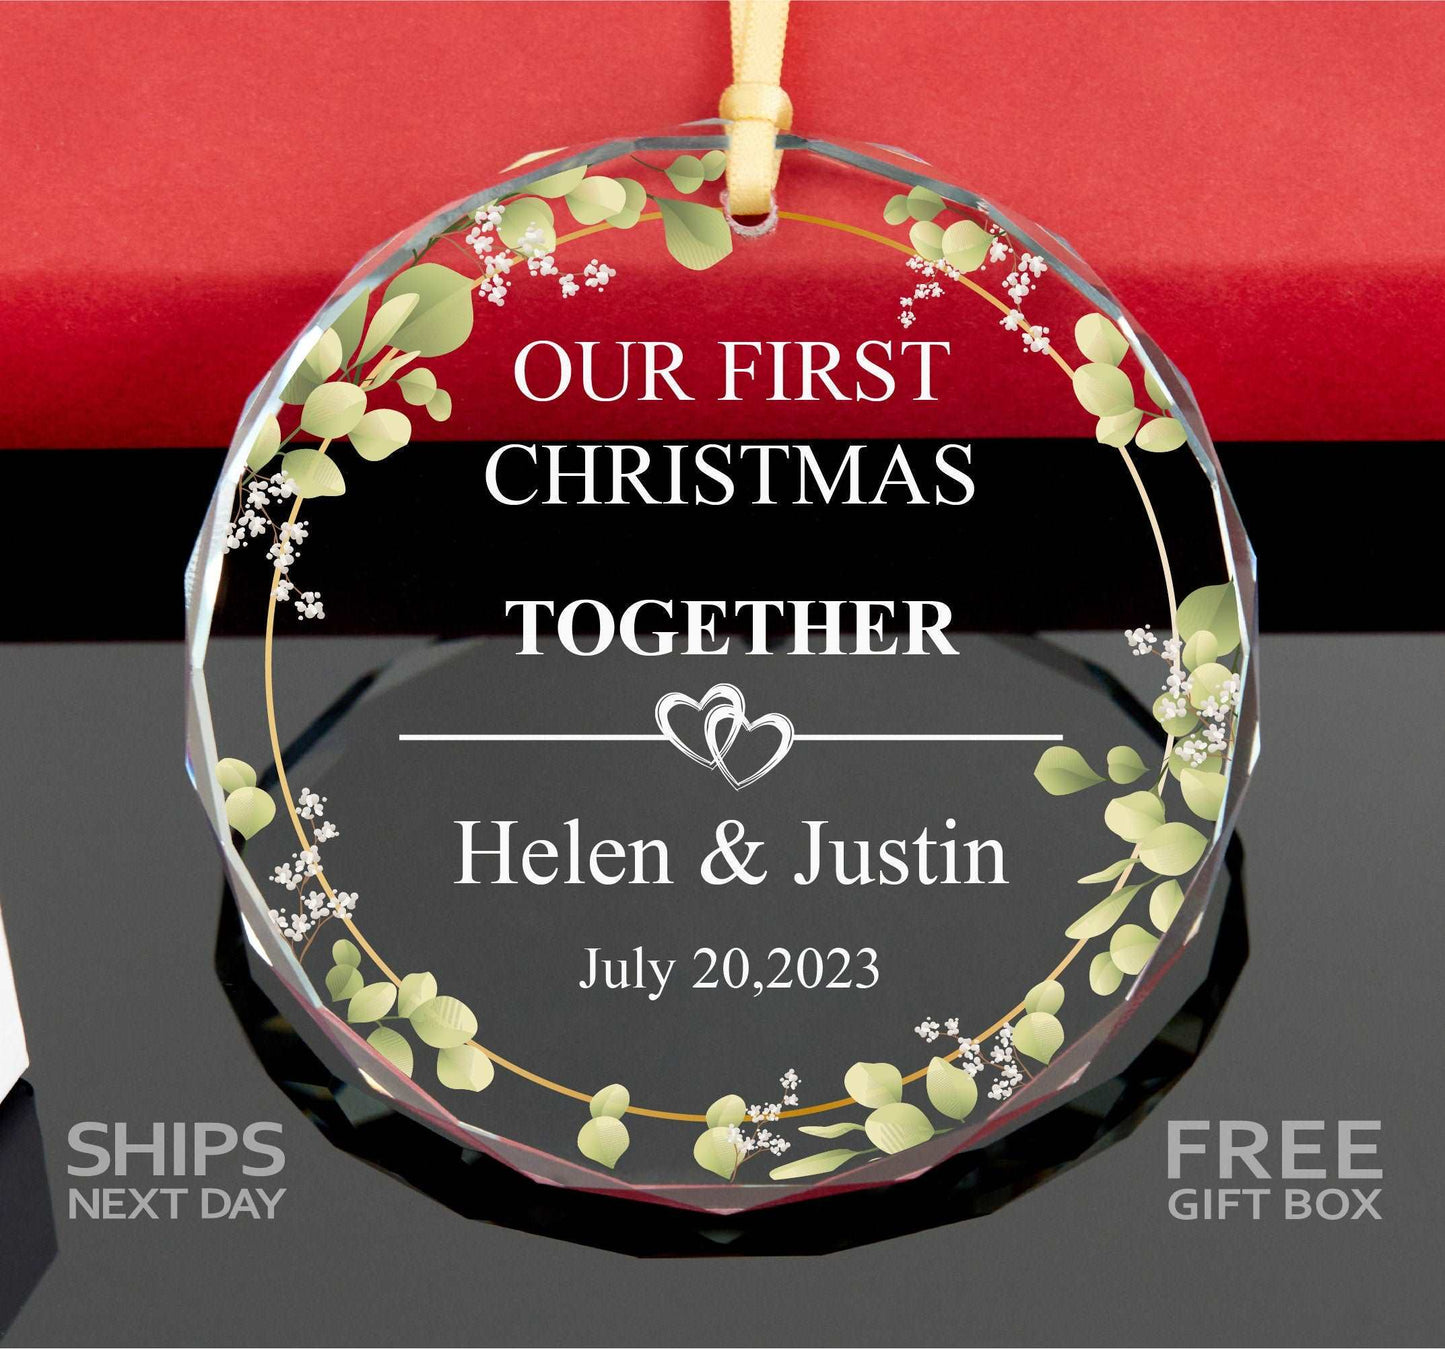 First Christmas Married Ornament • Newlywed Gift • Wedding Gift • 1st Christmas Gift 